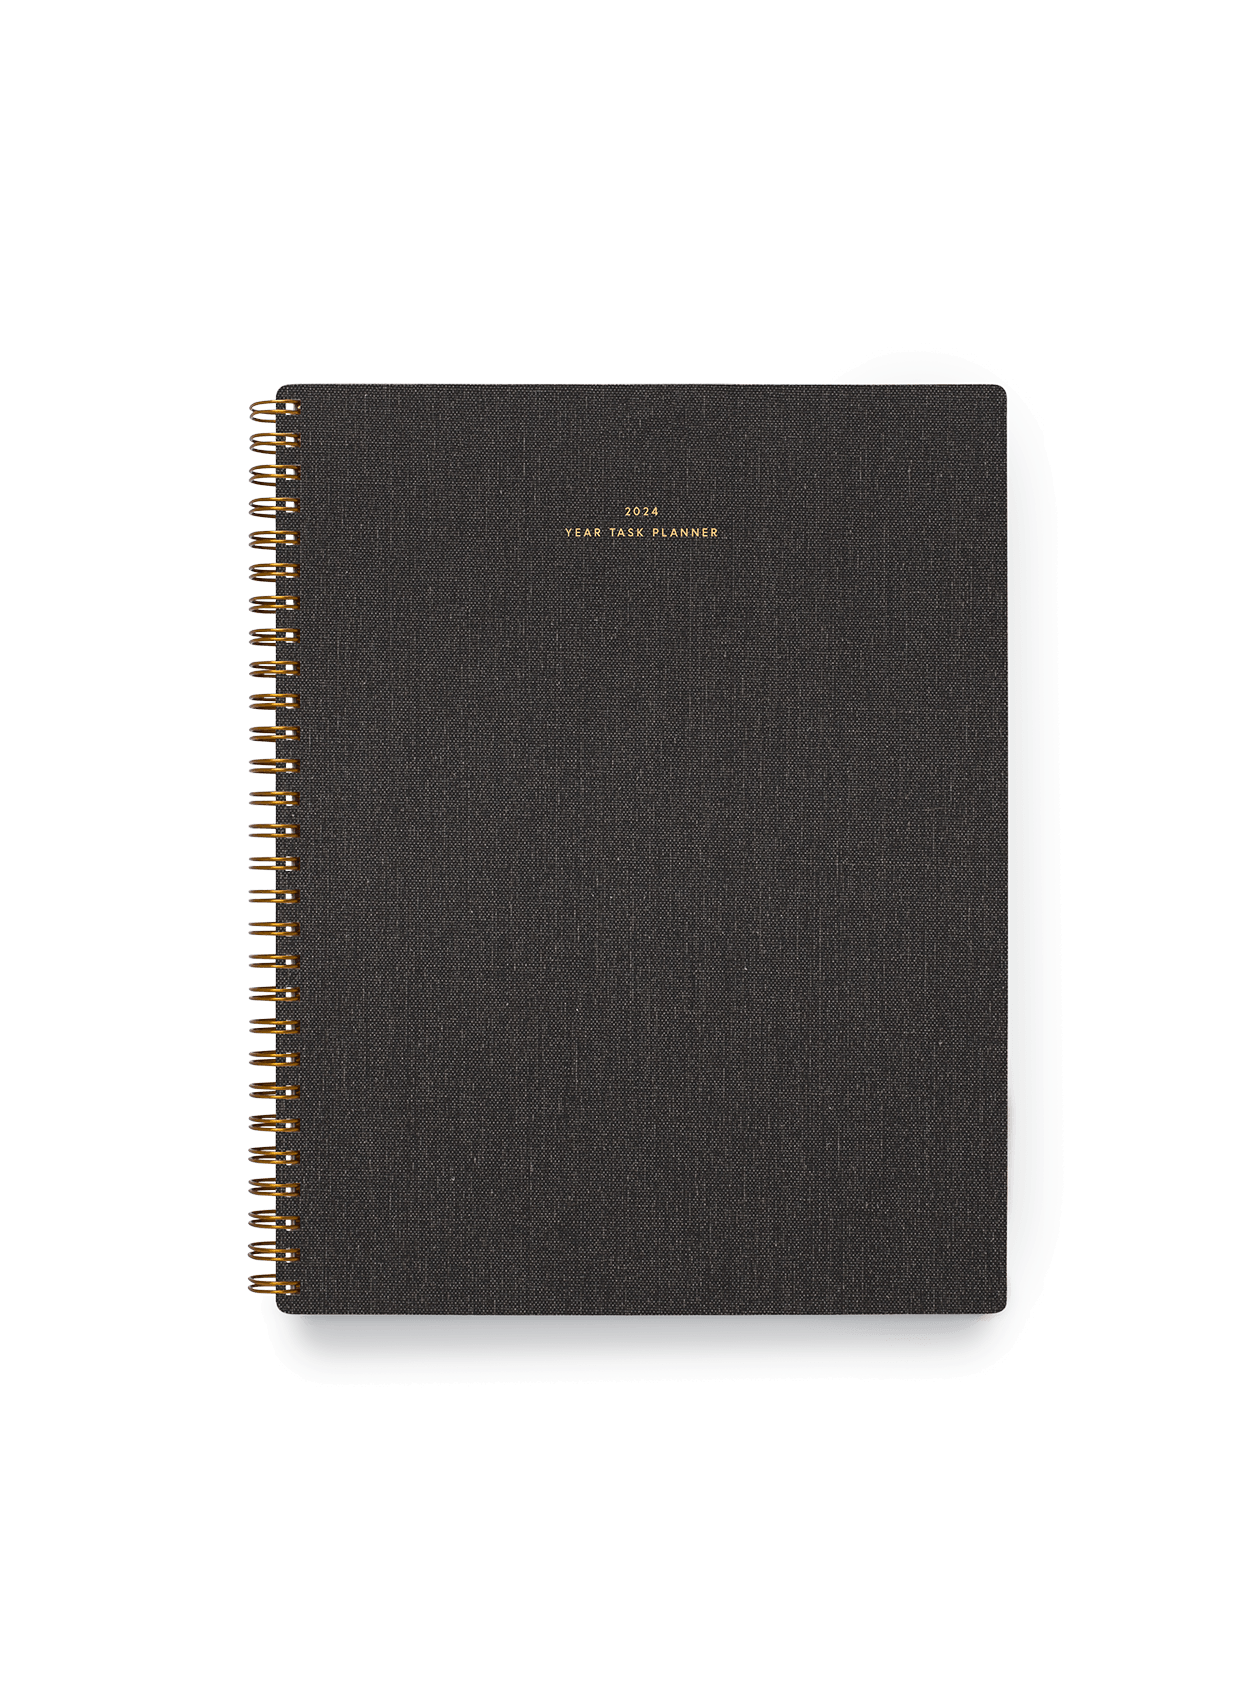 2024 Year Task Planner: Charcoal Gray